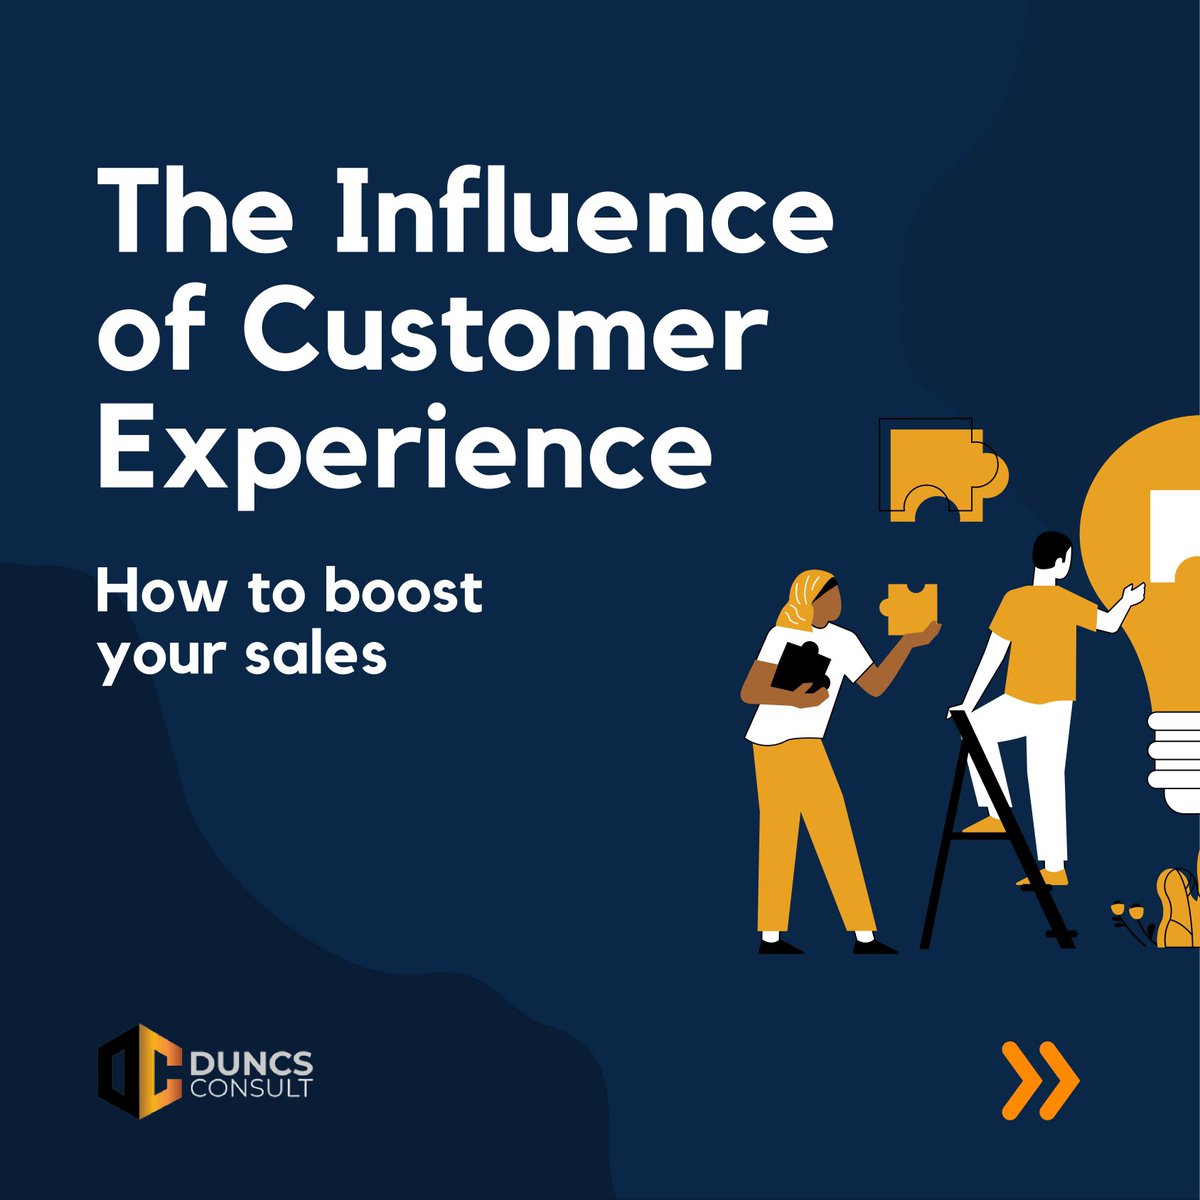 The Influence of Customer Experience - How to boost your sales.

#customerexperience #CustomerService #Sales #salestips